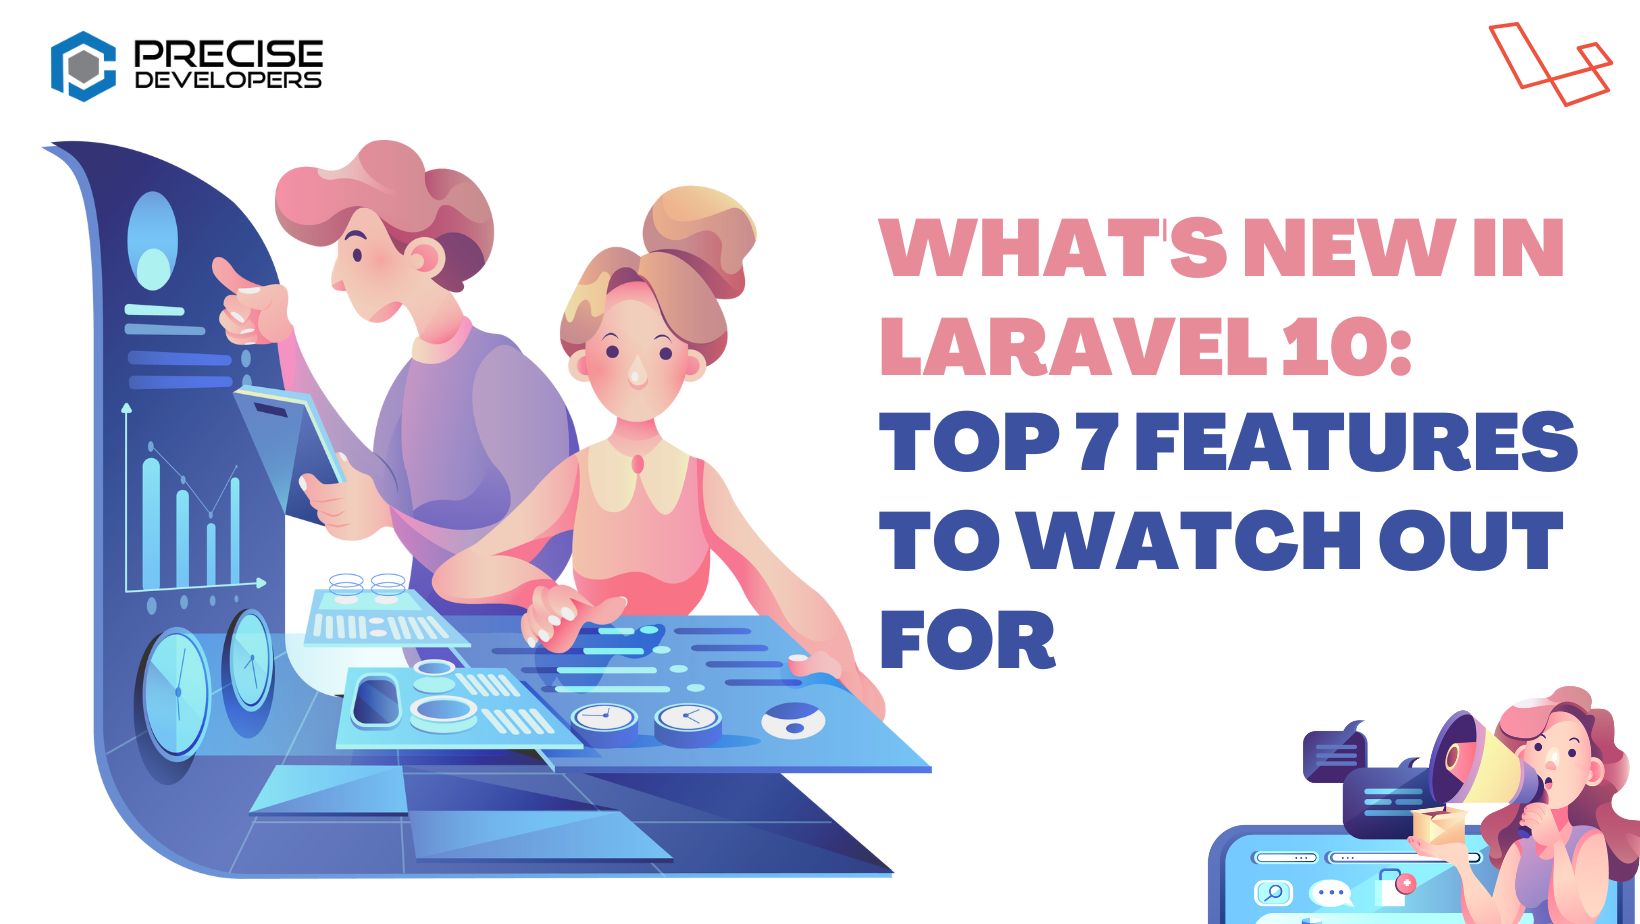 Whats-New-in-Laravel-10-Top-7-Features-to-Watch-Out-For